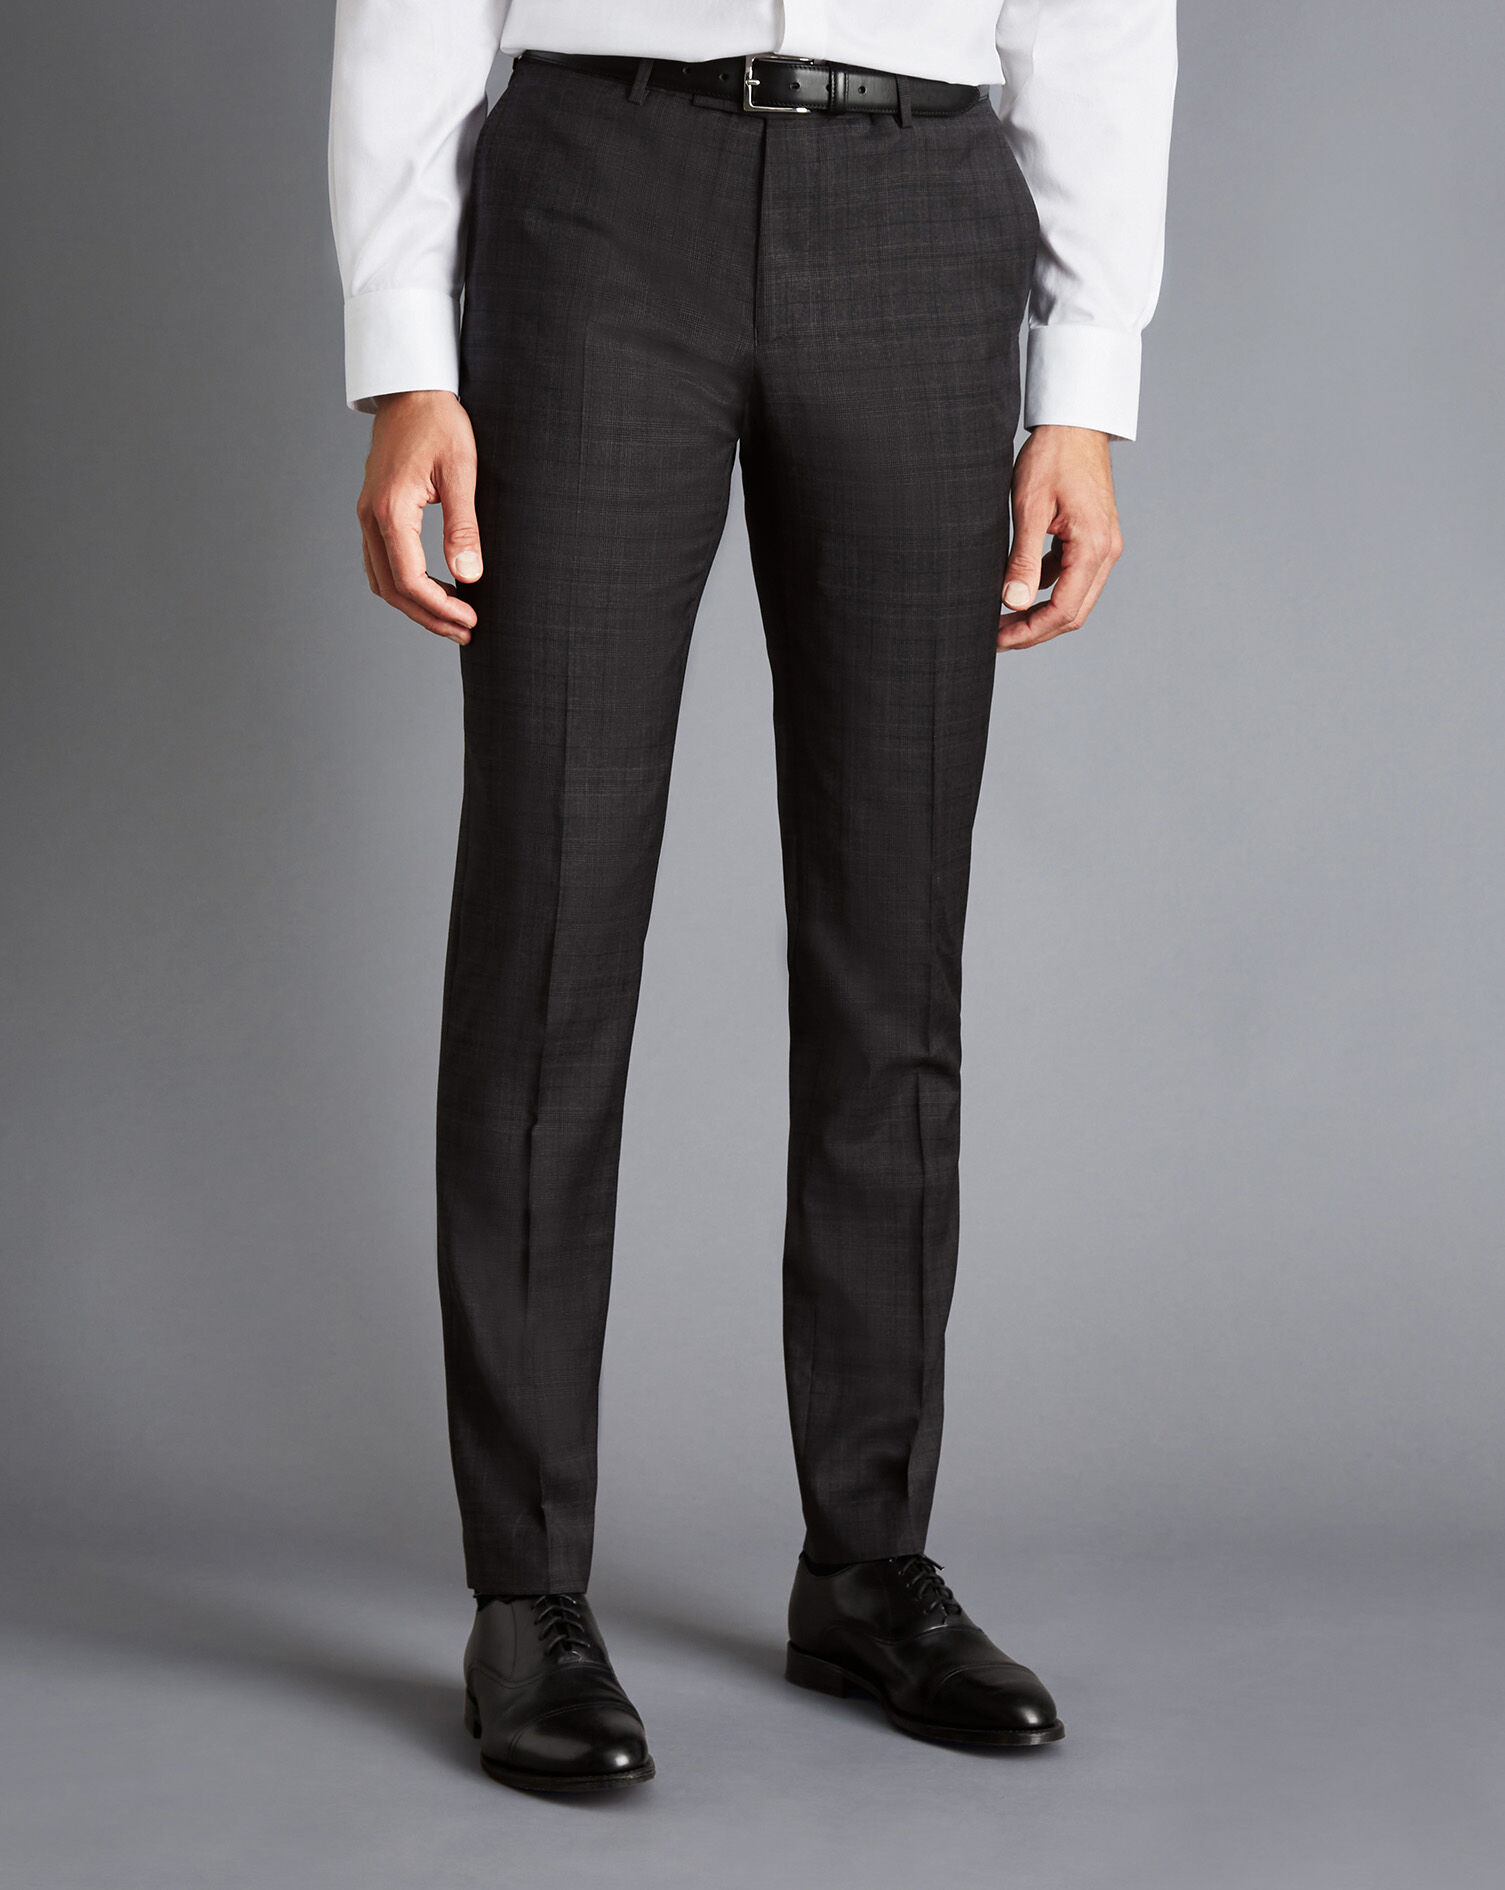 Fashion Suits Suit Trousers Charles Vögele Charles V\u00f6gele Suit Trouser black striped pattern business style 